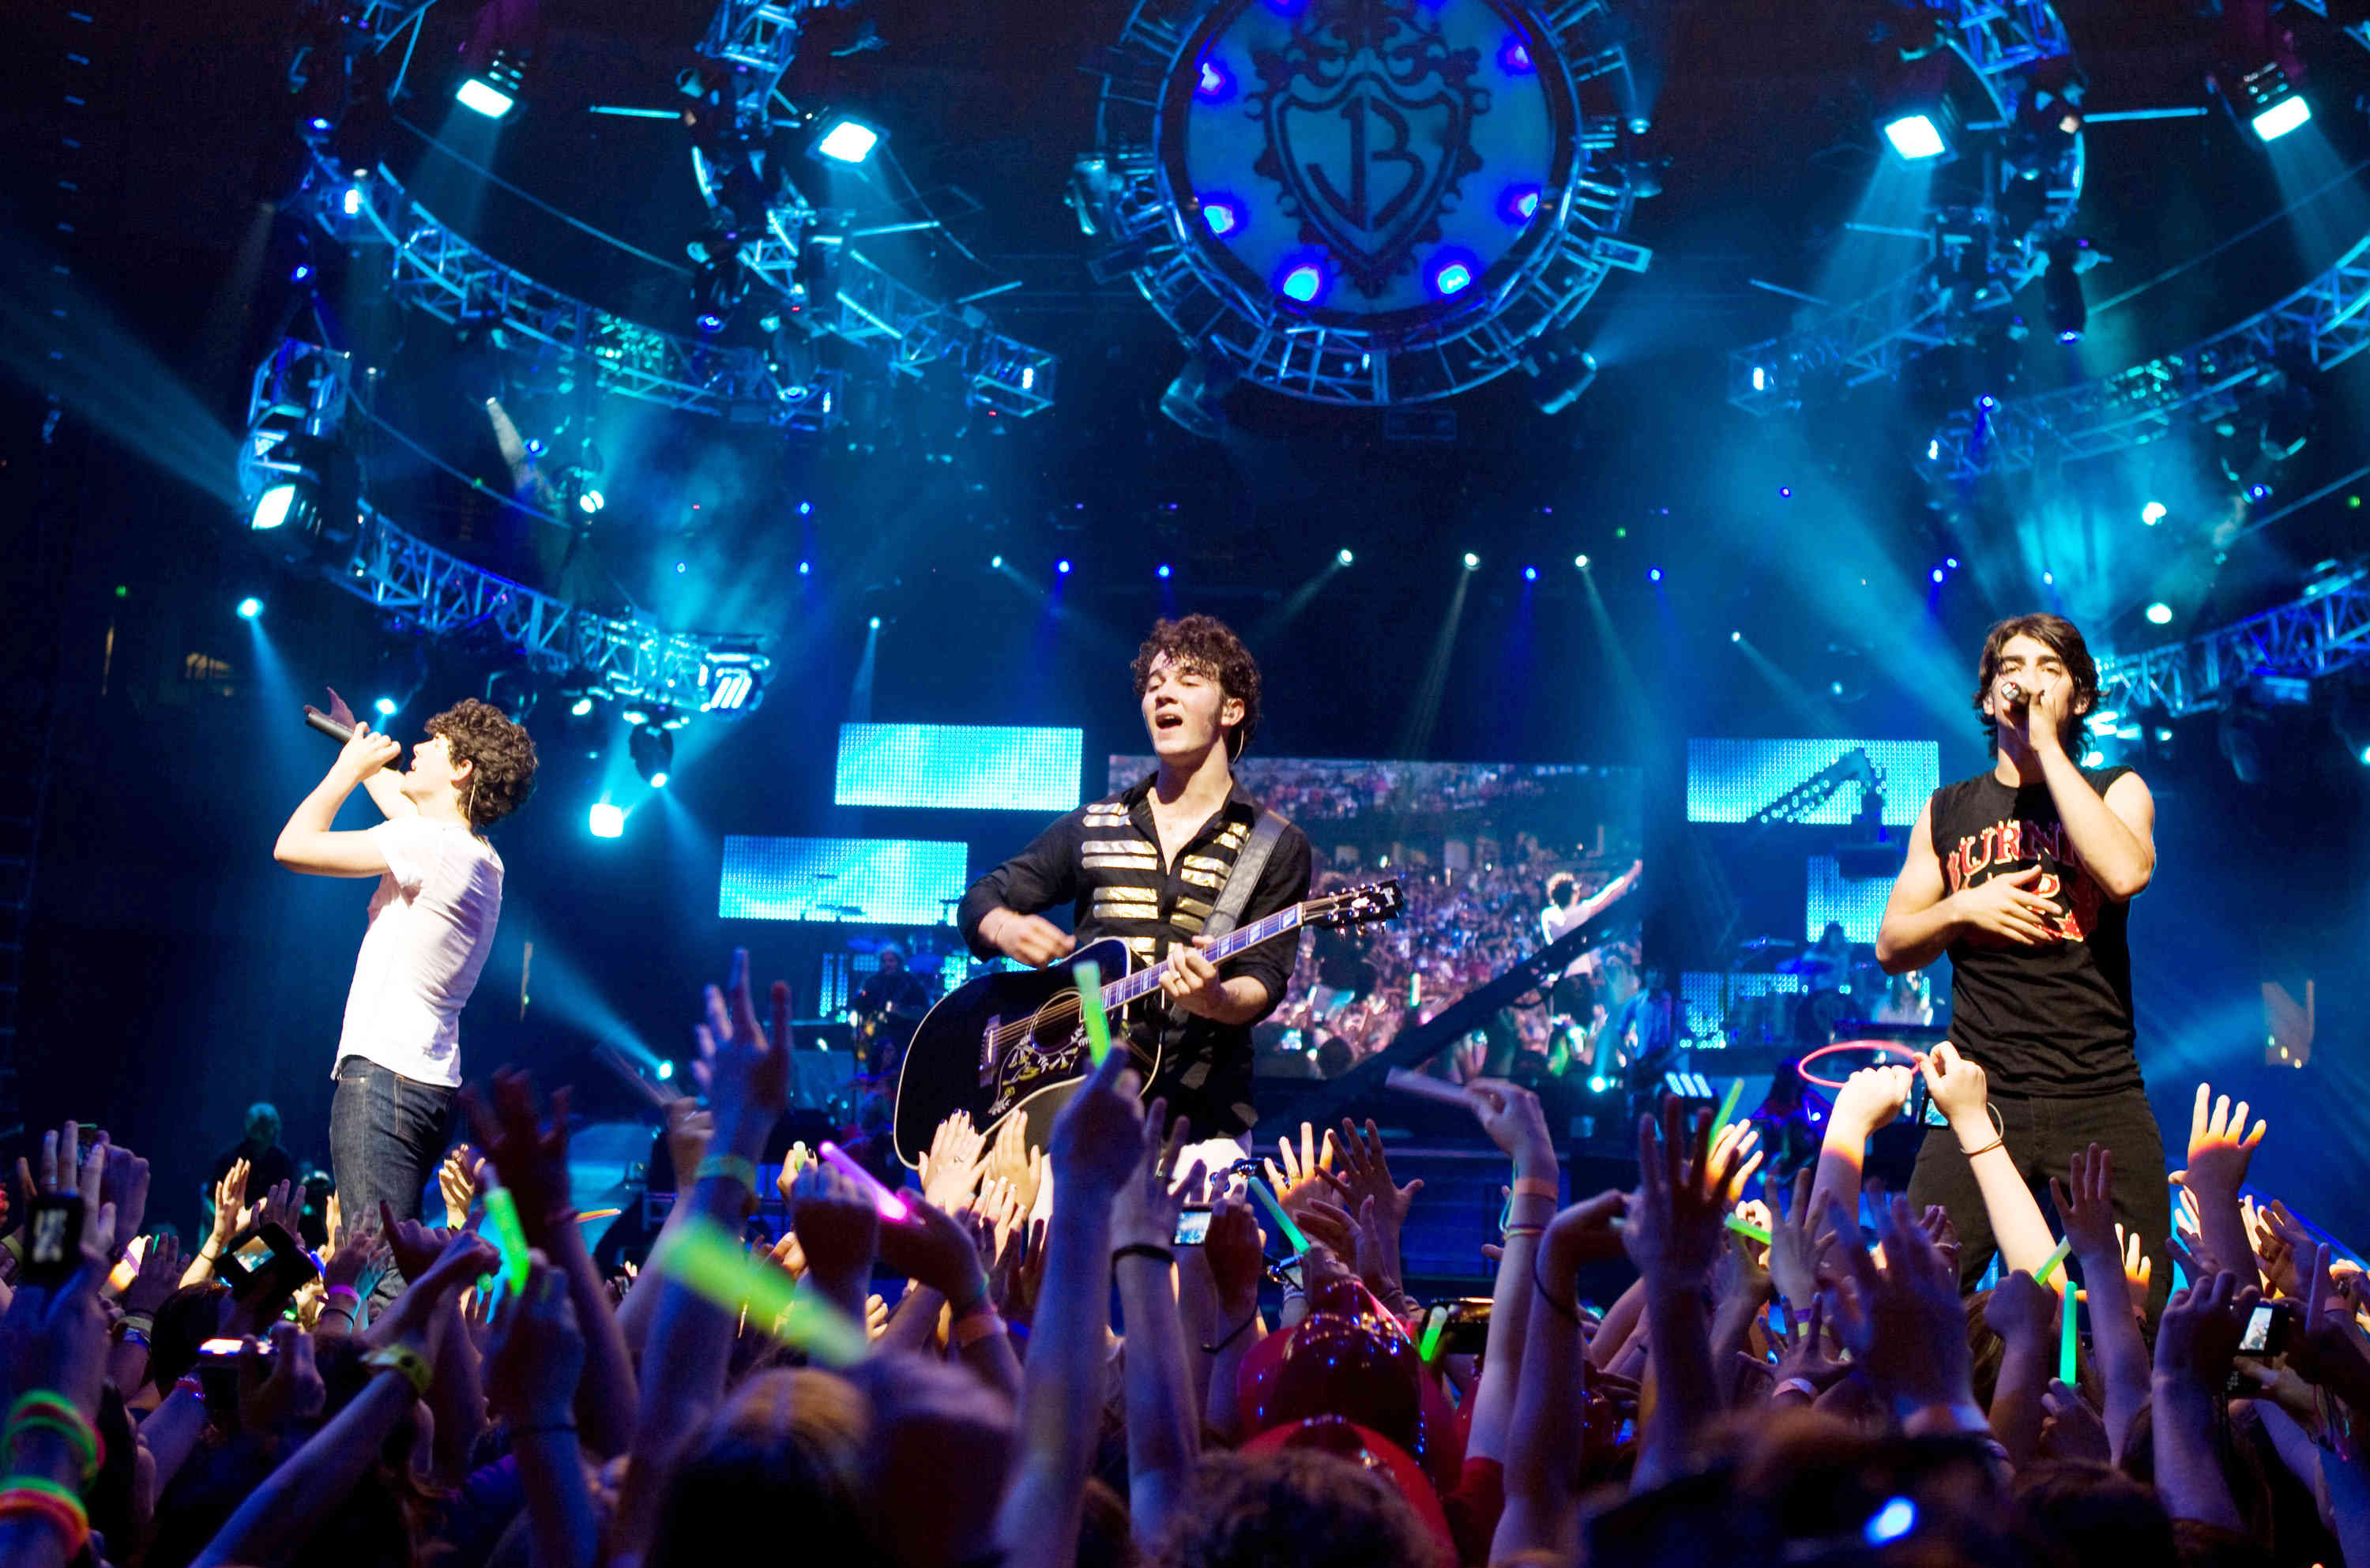 Jonas brothers 3d concert experience full movie download